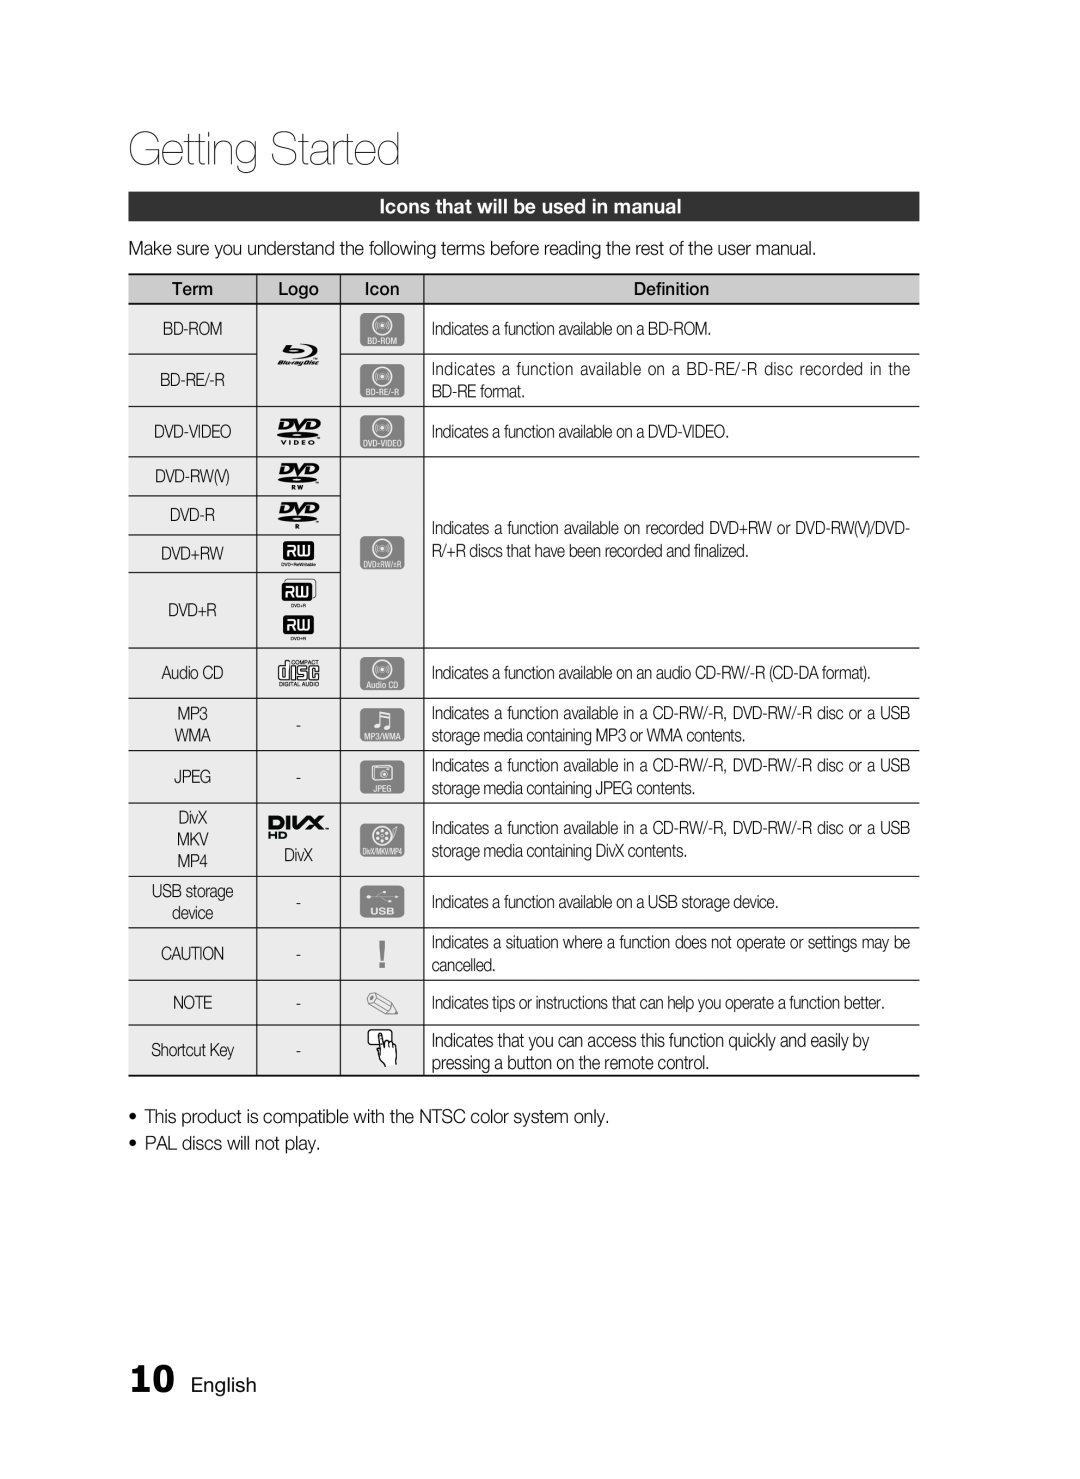 Samsung HW-D7000 user manual Icons that will be used in manual, Getting Started, English 